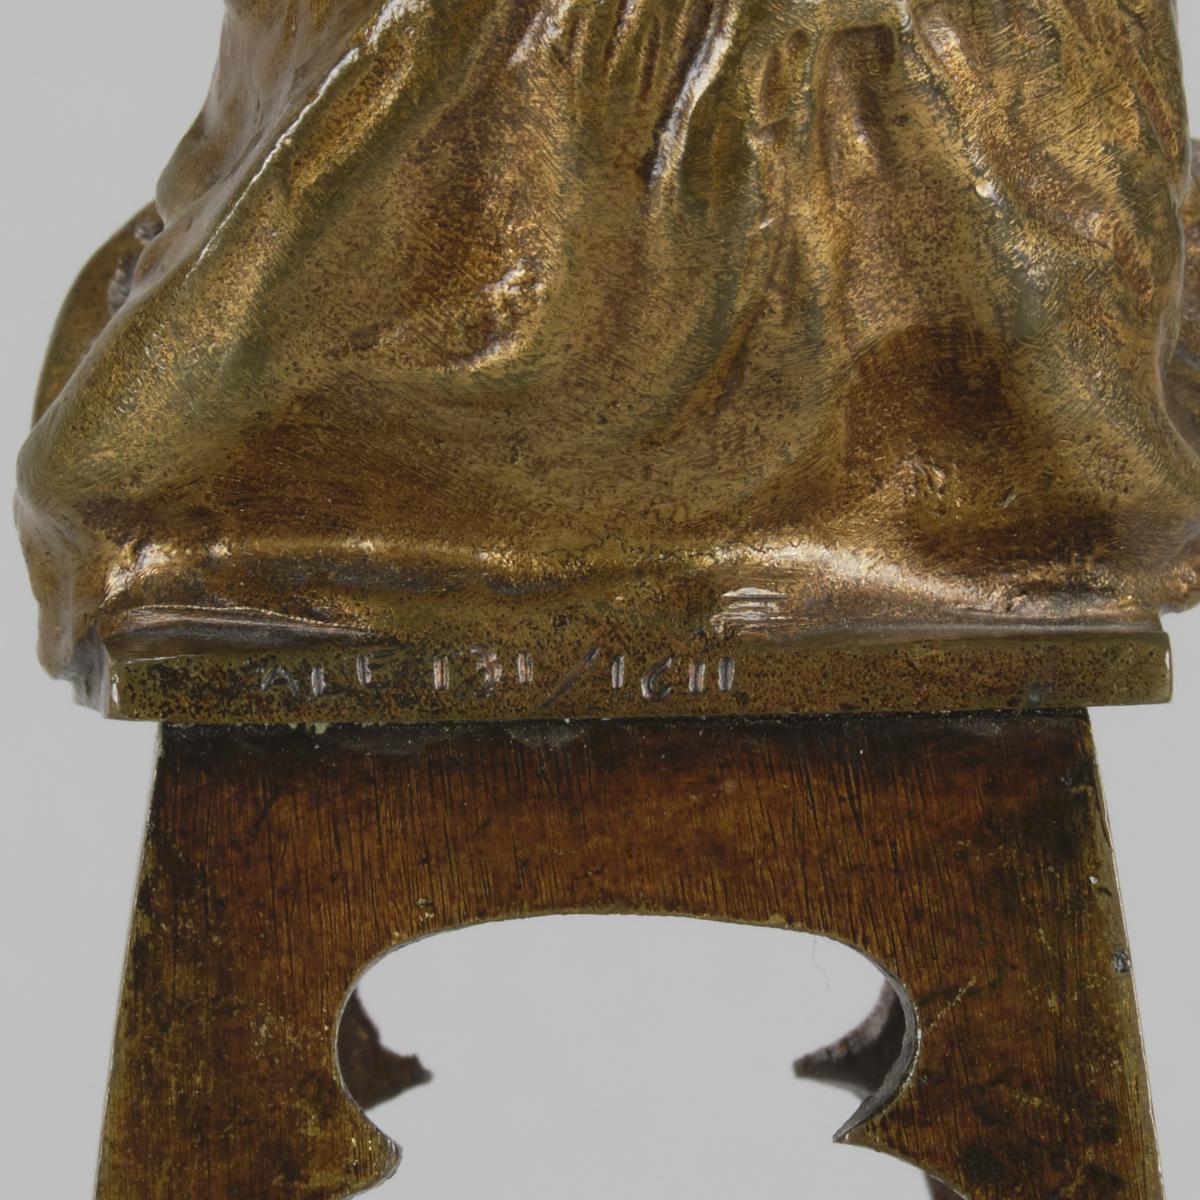 Early 20th Century Bronze Sculpture entitled "Girl Putting on her Shoe" by Juan Clara